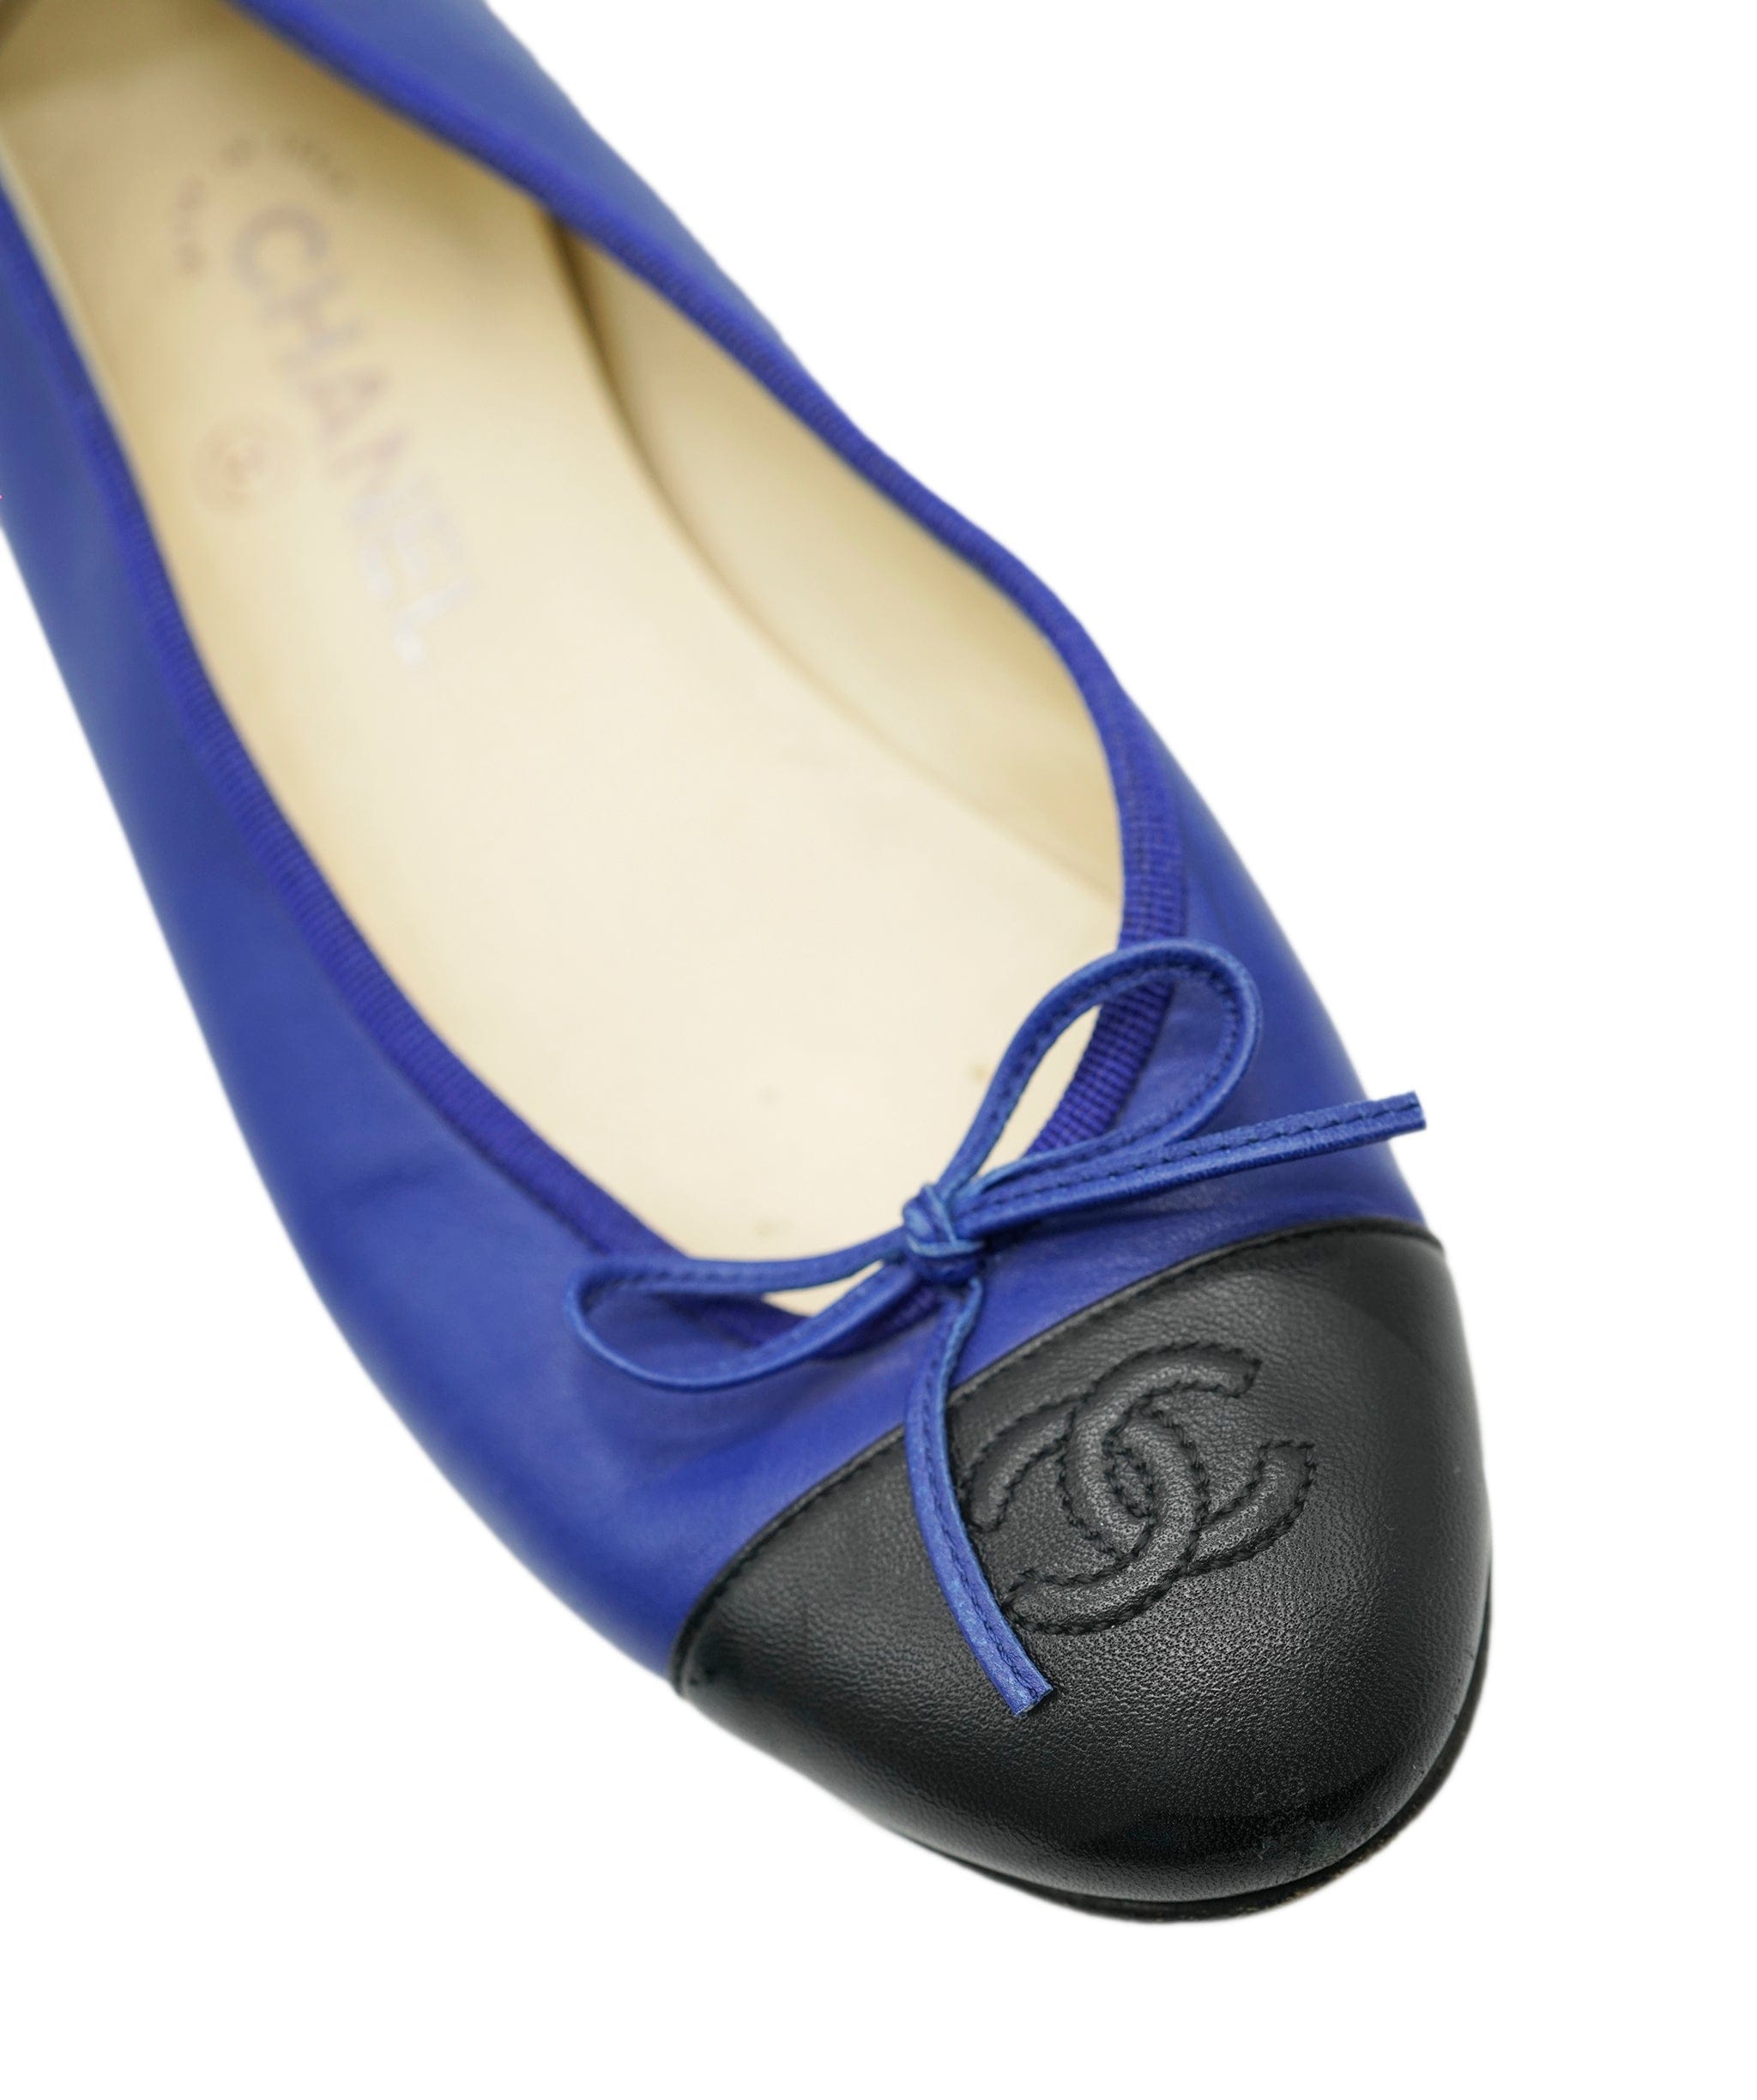 Chanel Pre-owned Chanel ballet flats blue electric 38 AVC1981